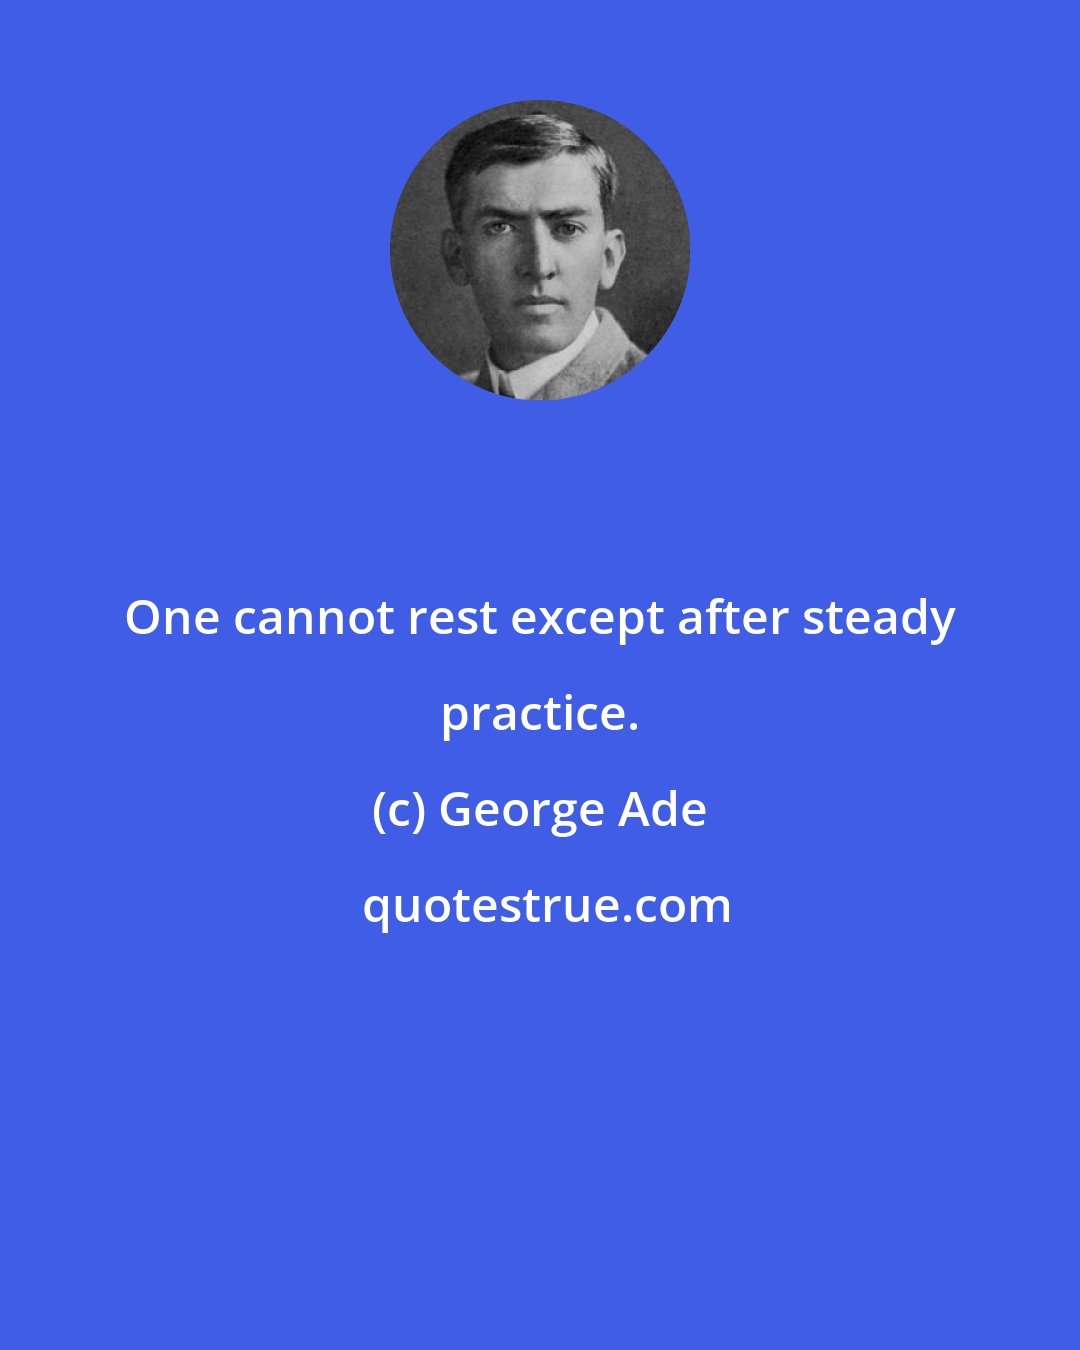 George Ade: One cannot rest except after steady practice.